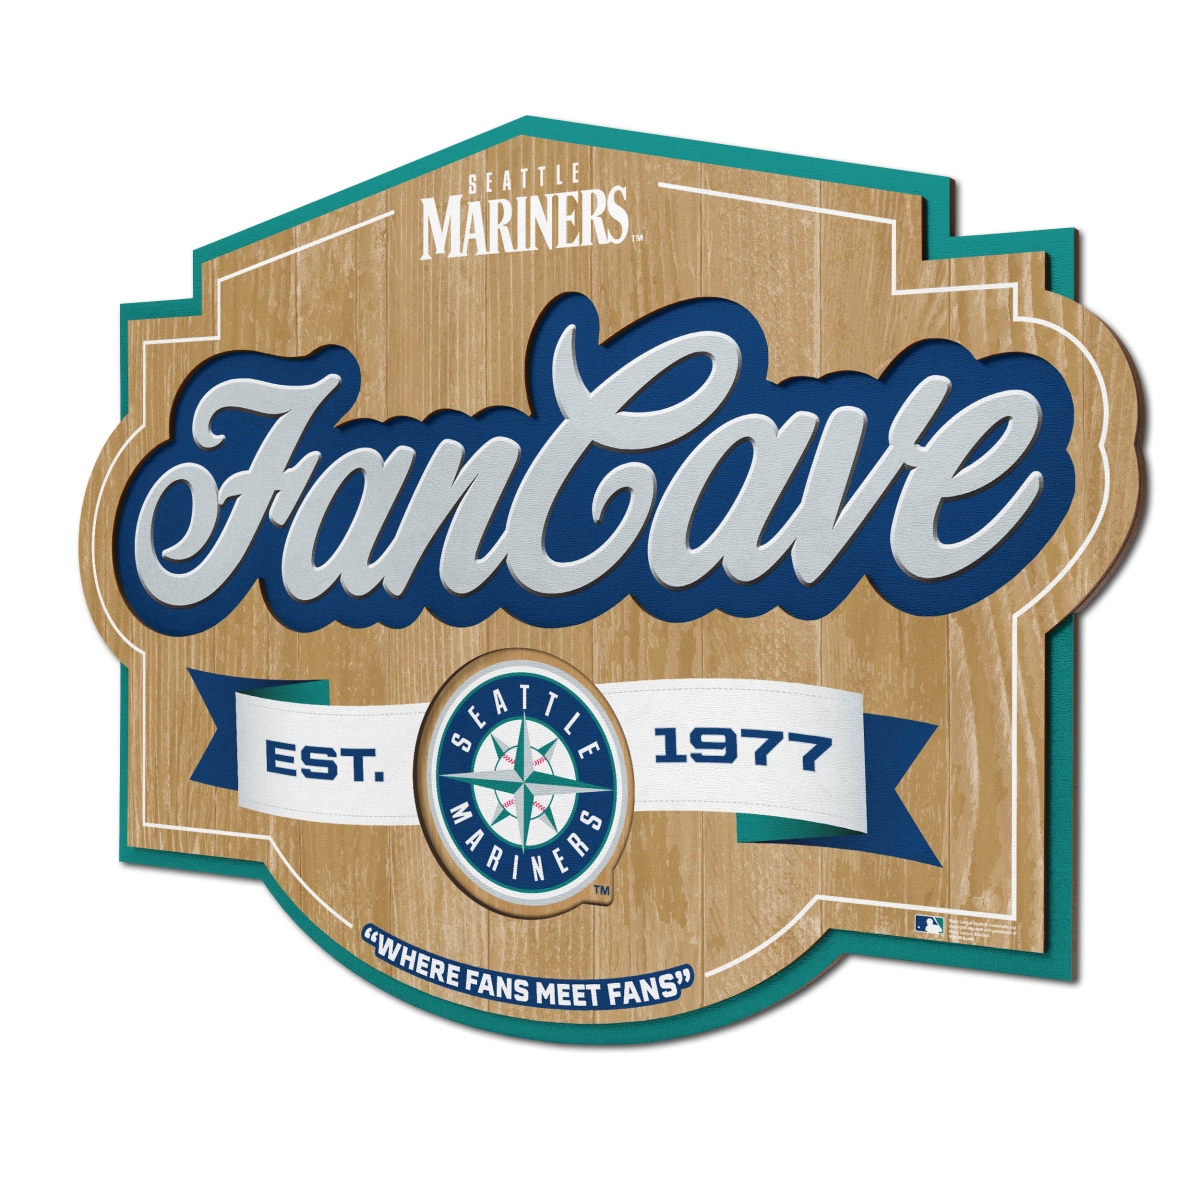 Online Shopping for Housewares, Baby Gear, Health & more. YouTheFan 1903356  17 x 12.5 in. MLB Seattle Mariners Fan Cave Sign